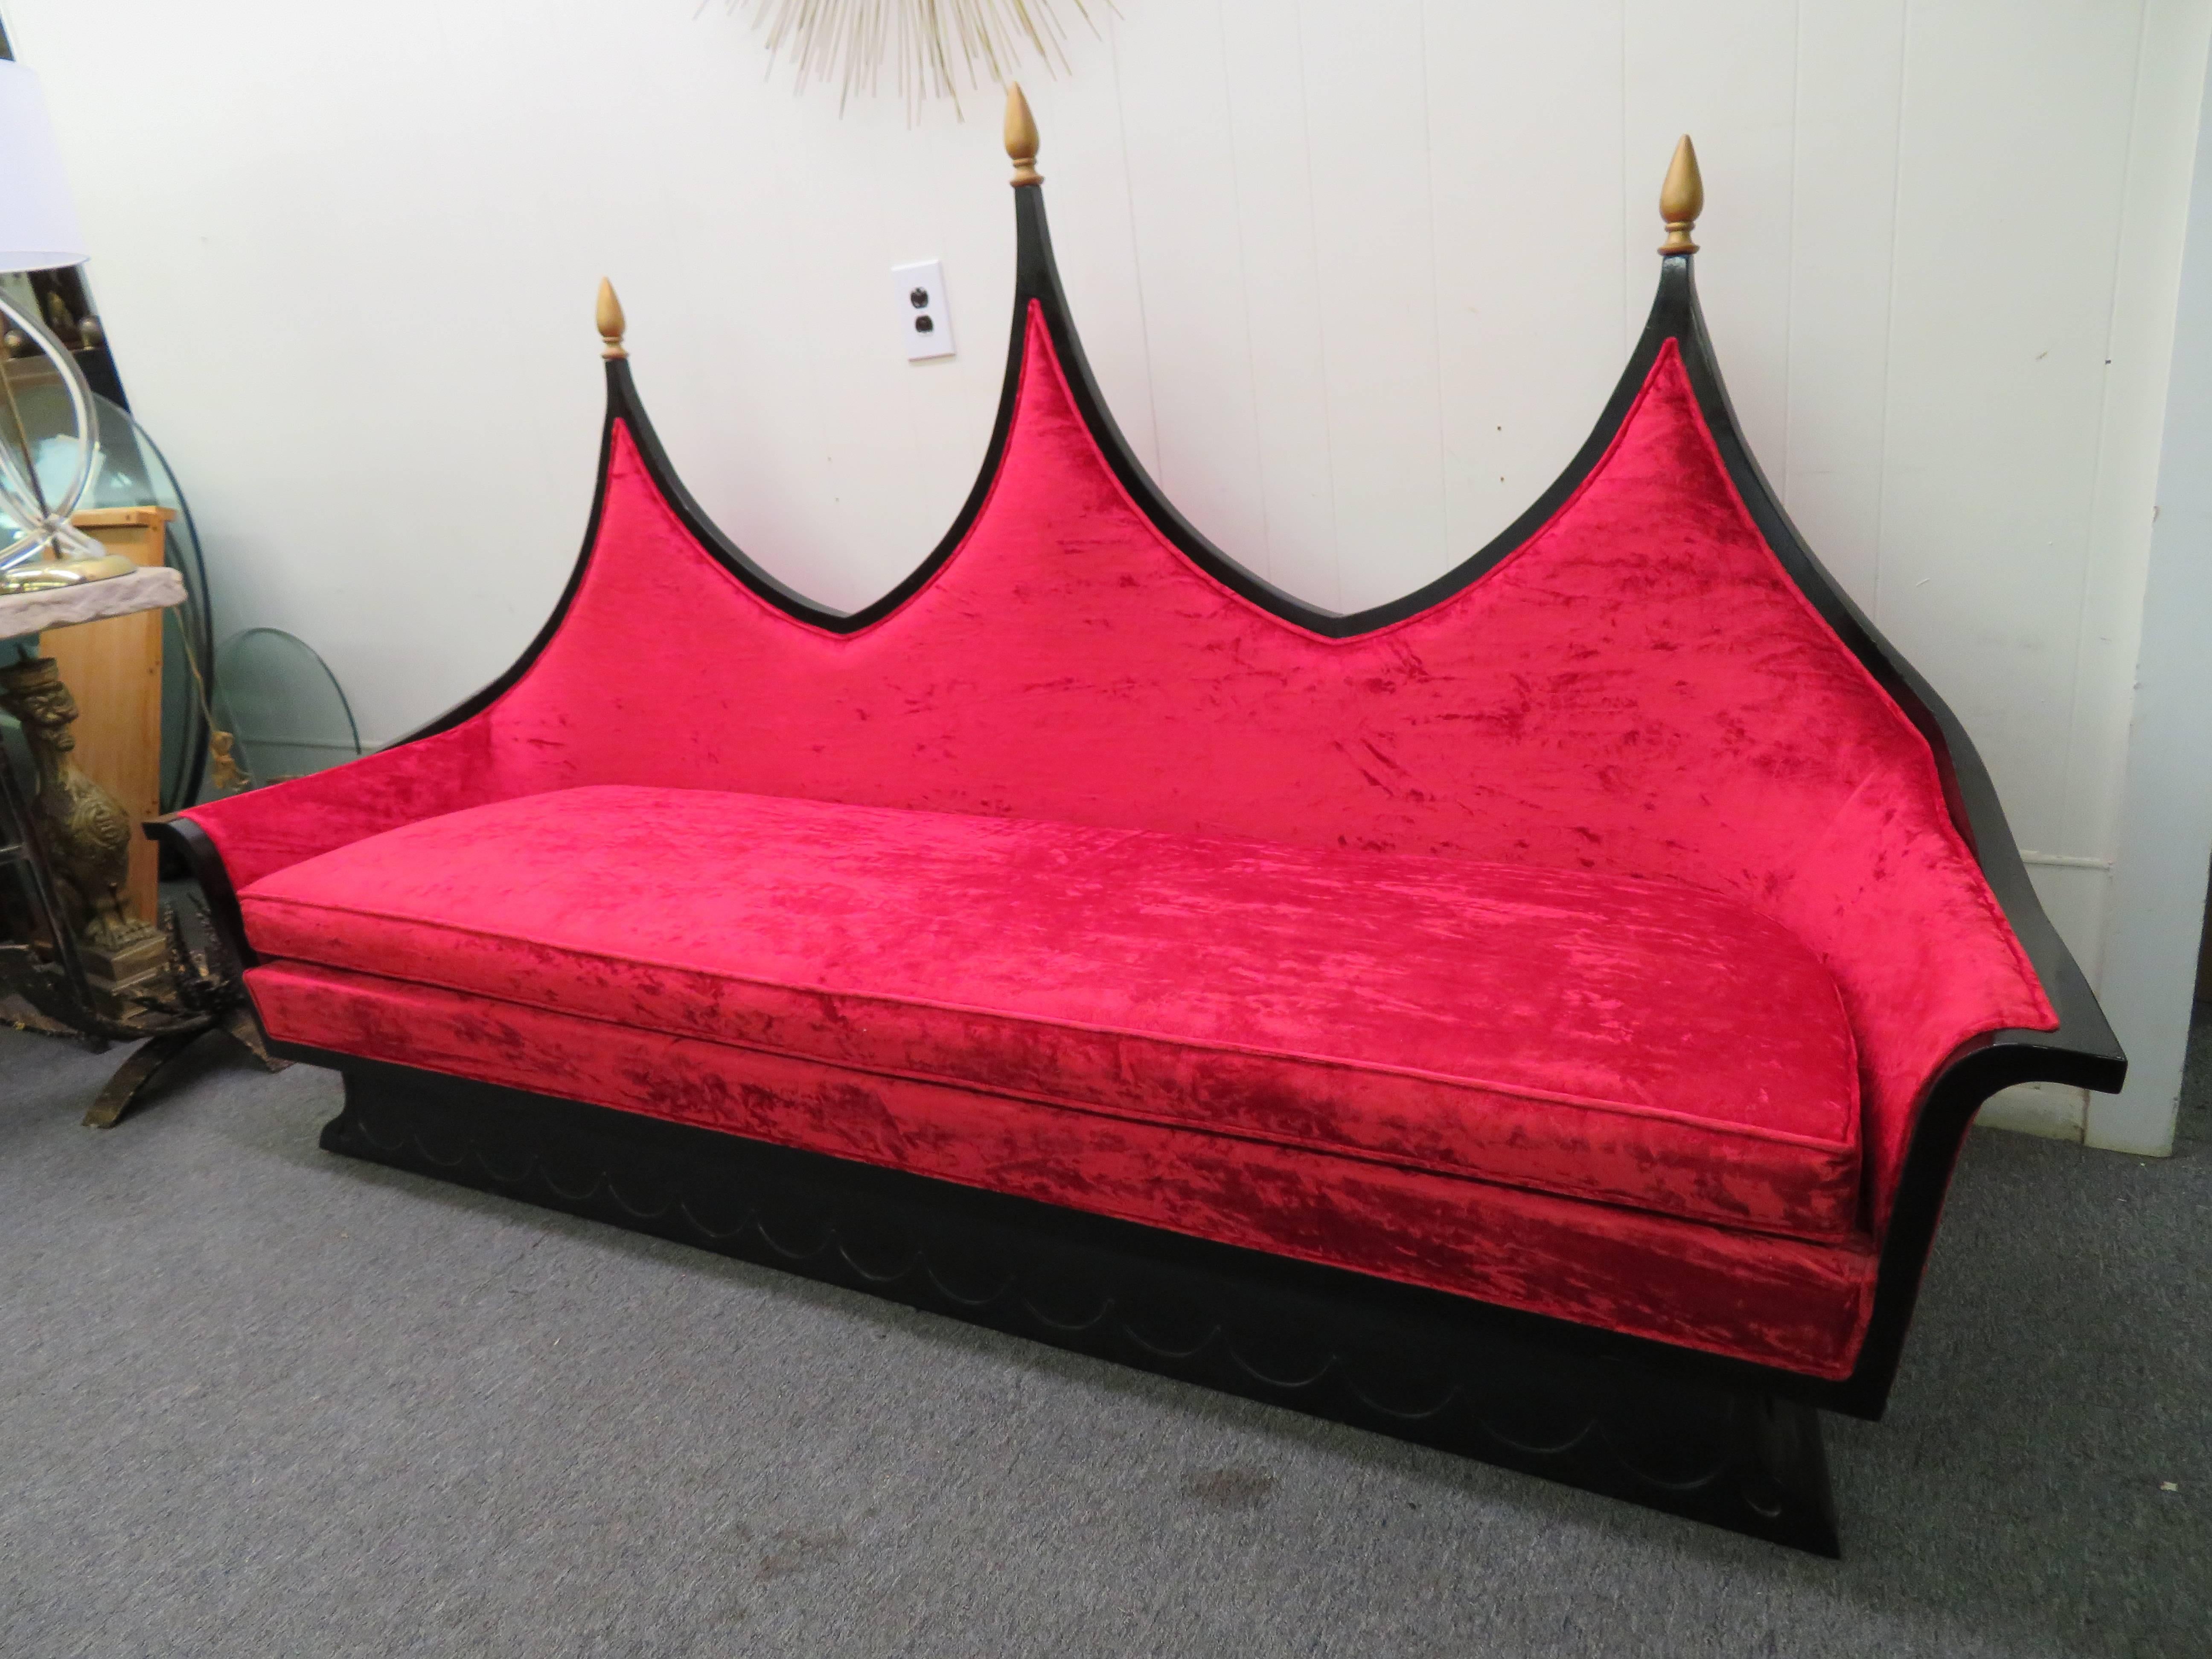 Magnificent and rare Hollywood Regency James Mont style black lacquered sofa in amazing vintage condition. Believe it or not this piece has survived so well because it has been covered in plastic for the last 60 years so the fabric and foam are in